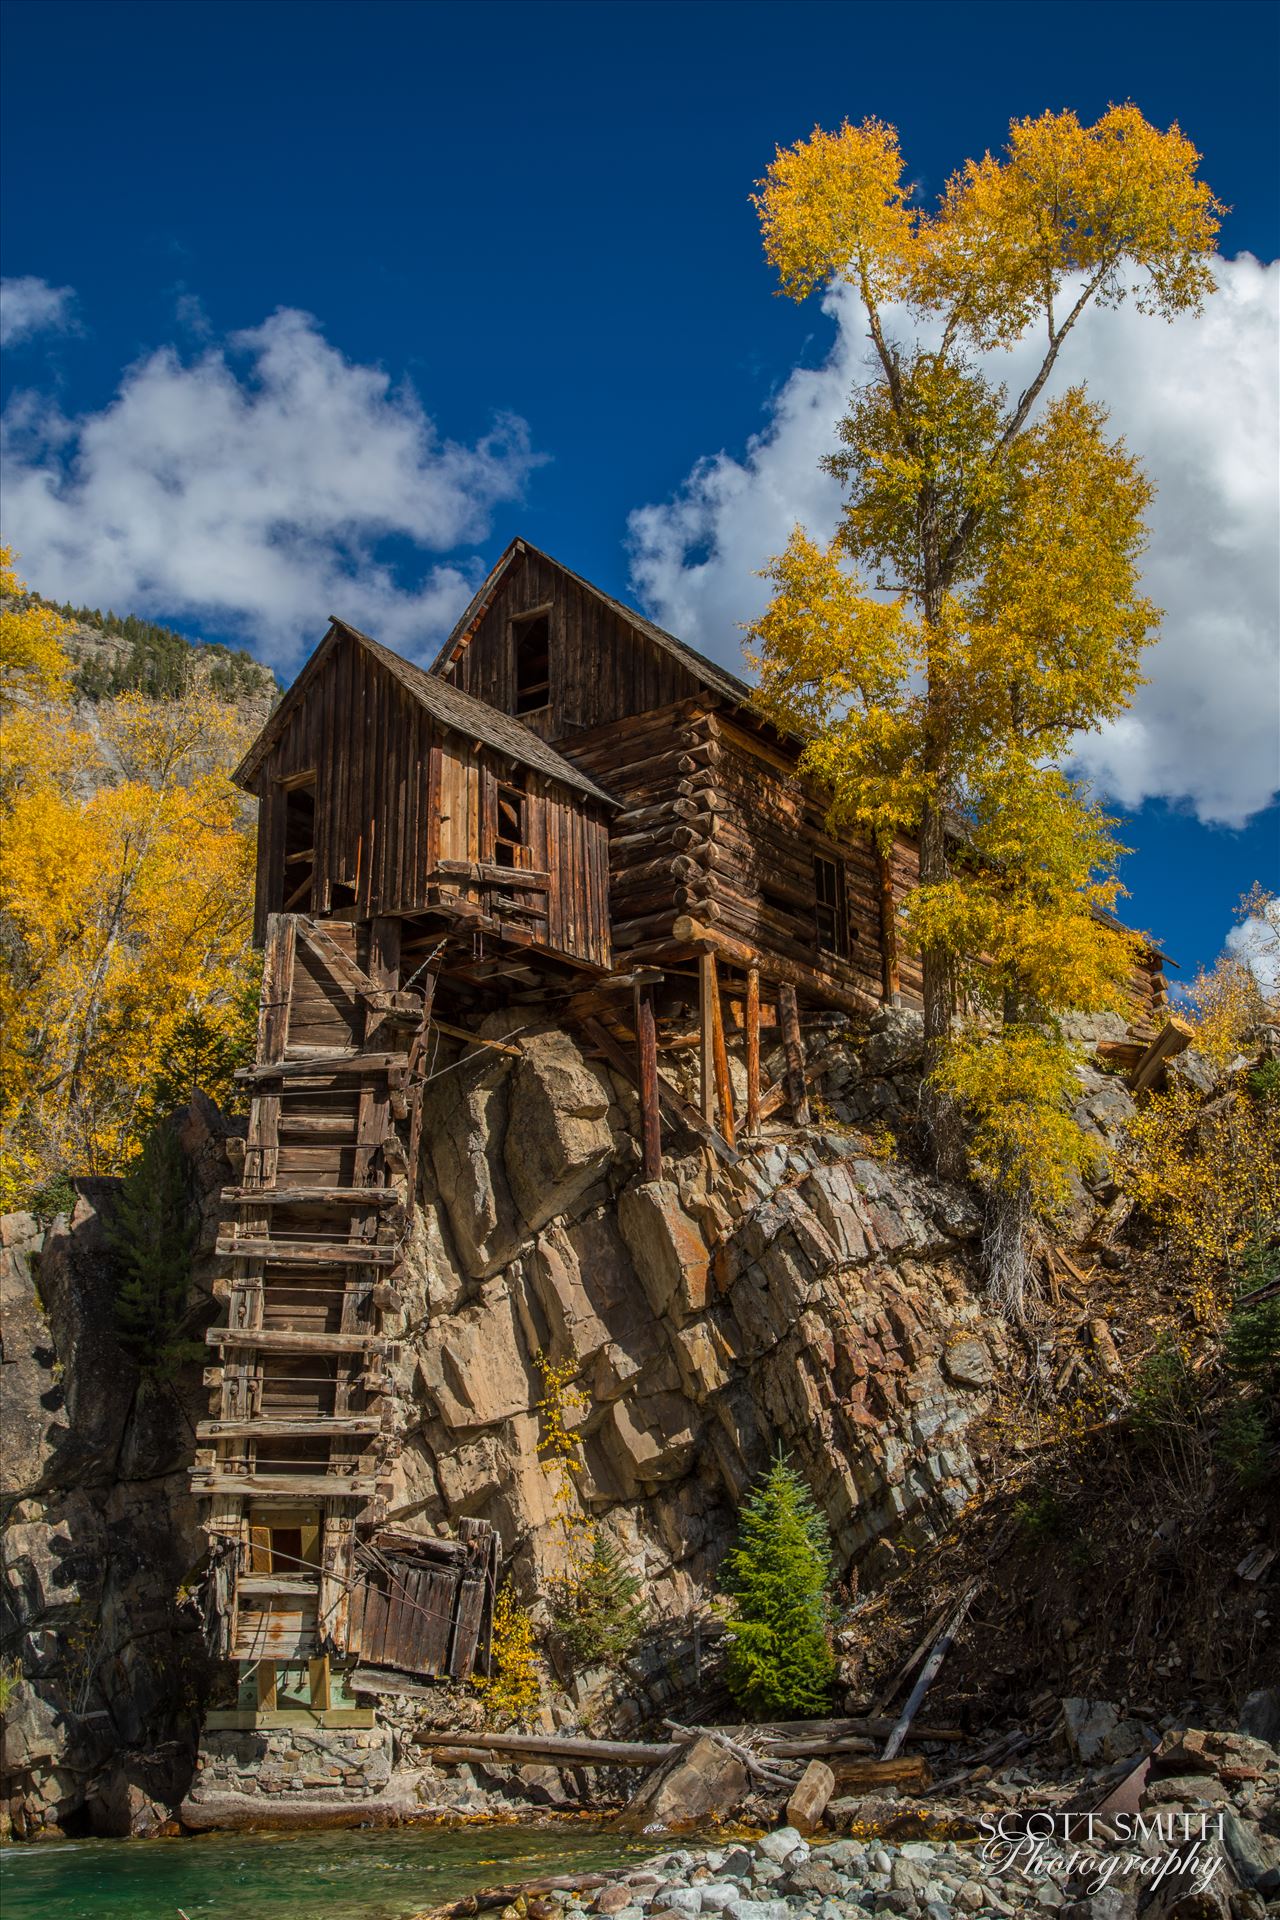 Crystal Mill, Colorado 01 - The Crystal Mill, or the Old Mill is an 1892 wooden powerhouse located on an outcrop above the Crystal River in Crystal, Colorado by Scott Smith Photos